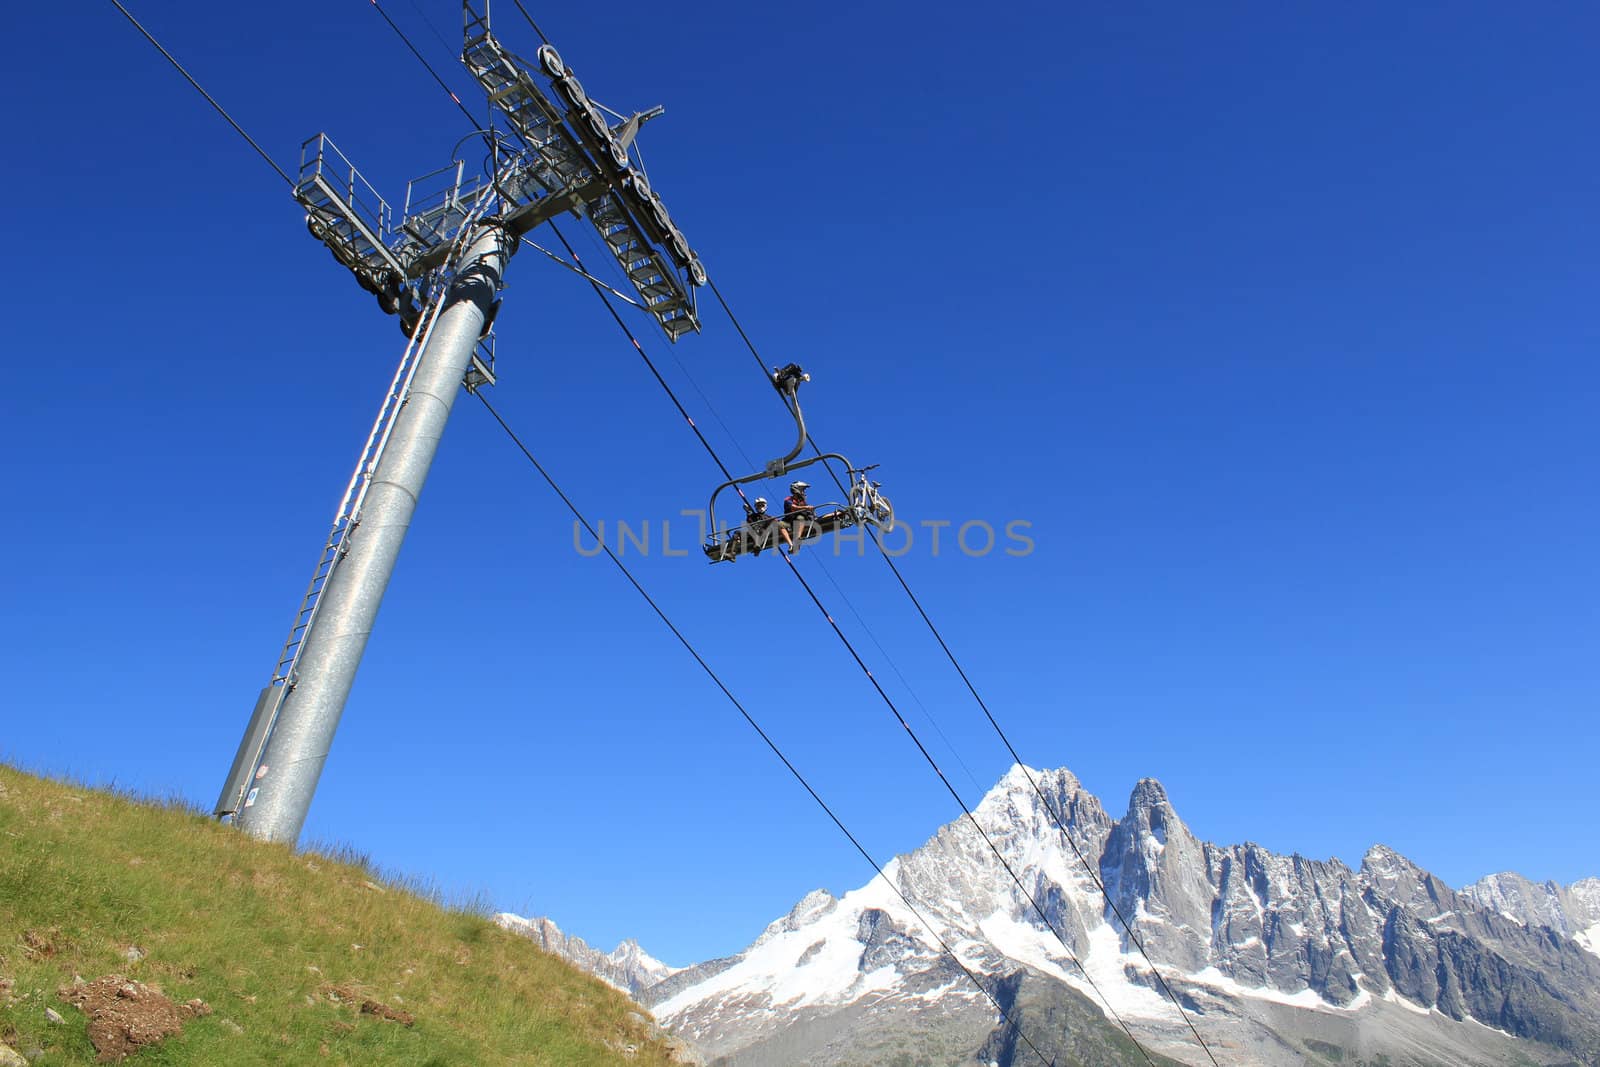 Bikers on a chairlift in the mountain by Elenaphotos21